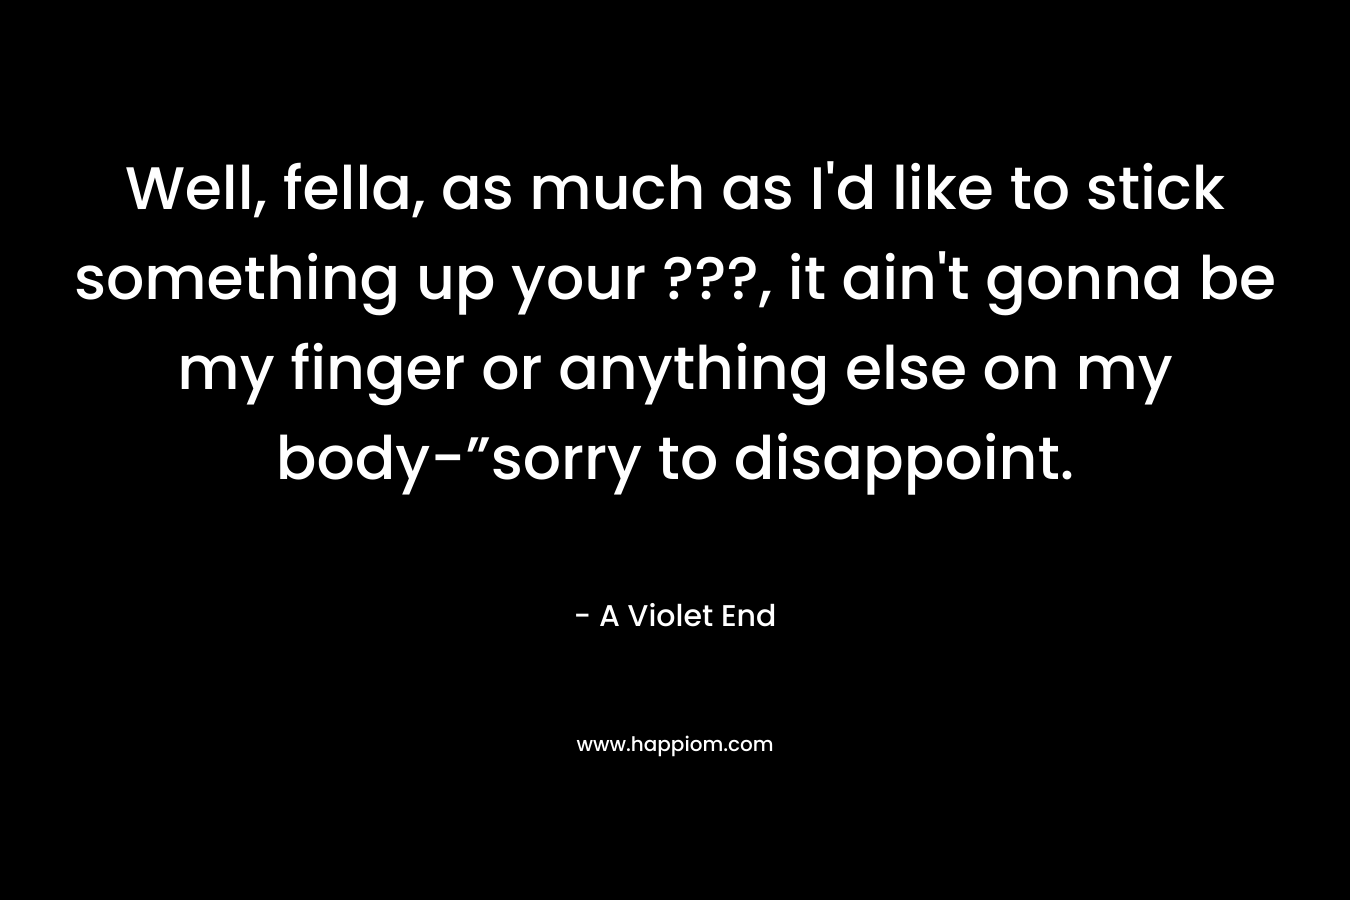 Well, fella, as much as I’d like to stick something up your ???, it ain’t gonna be my finger or anything else on my body-”sorry to disappoint. – A Violet End